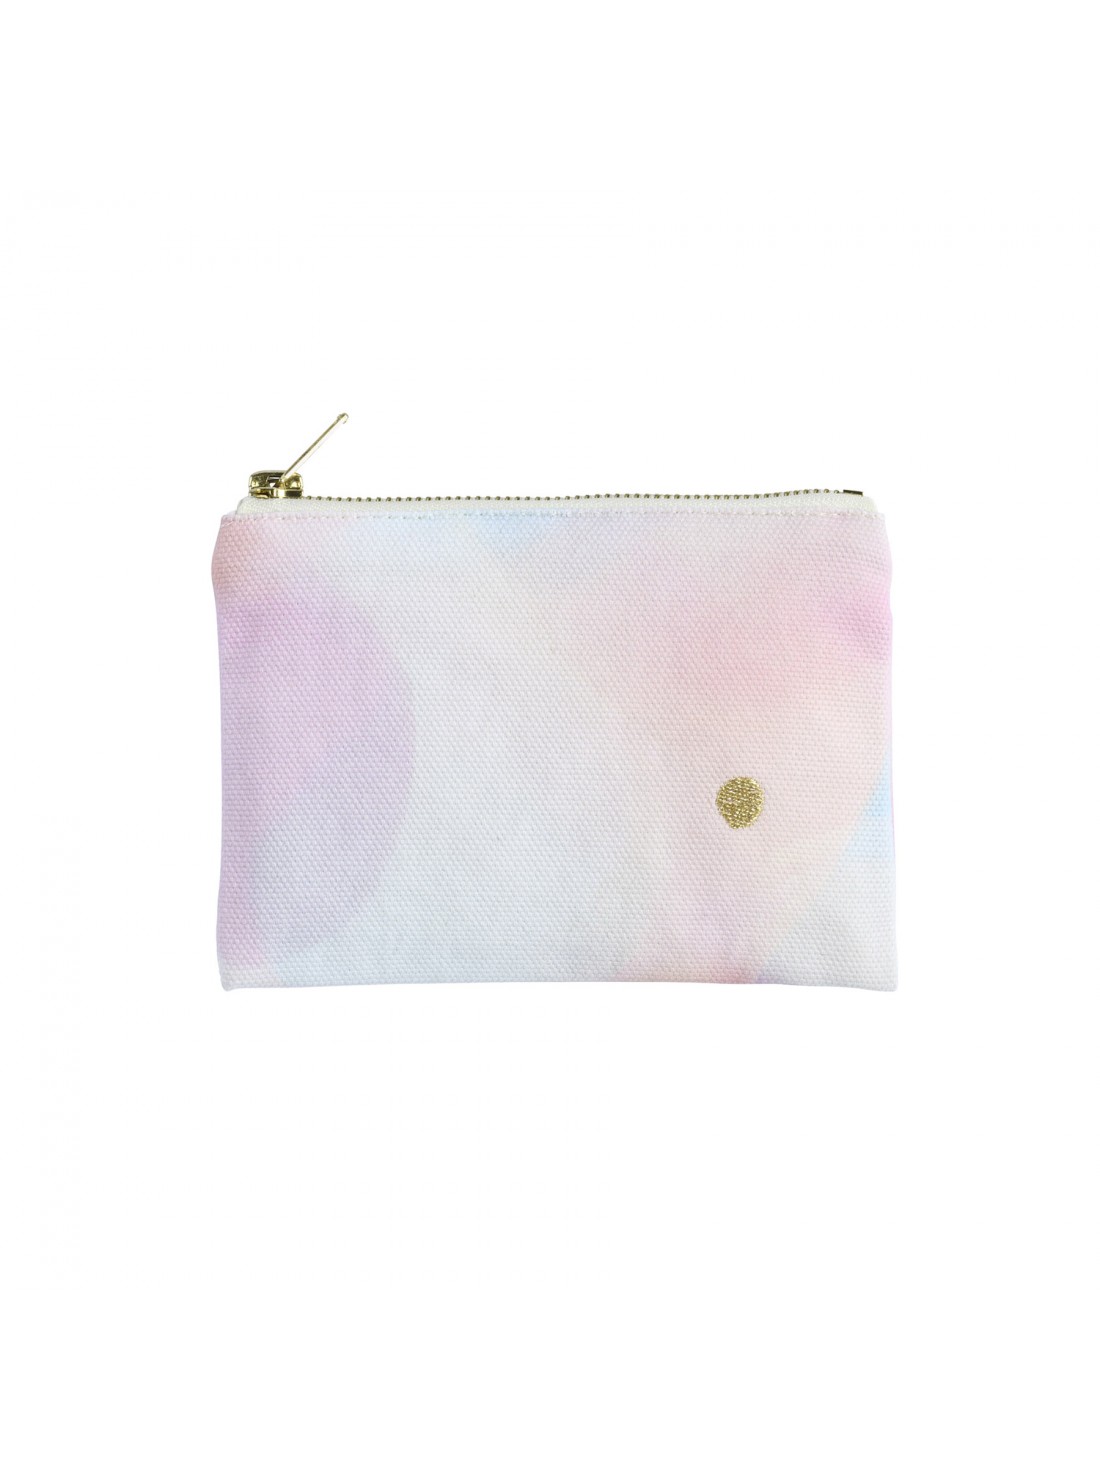 POUCH IONA LUCIA S